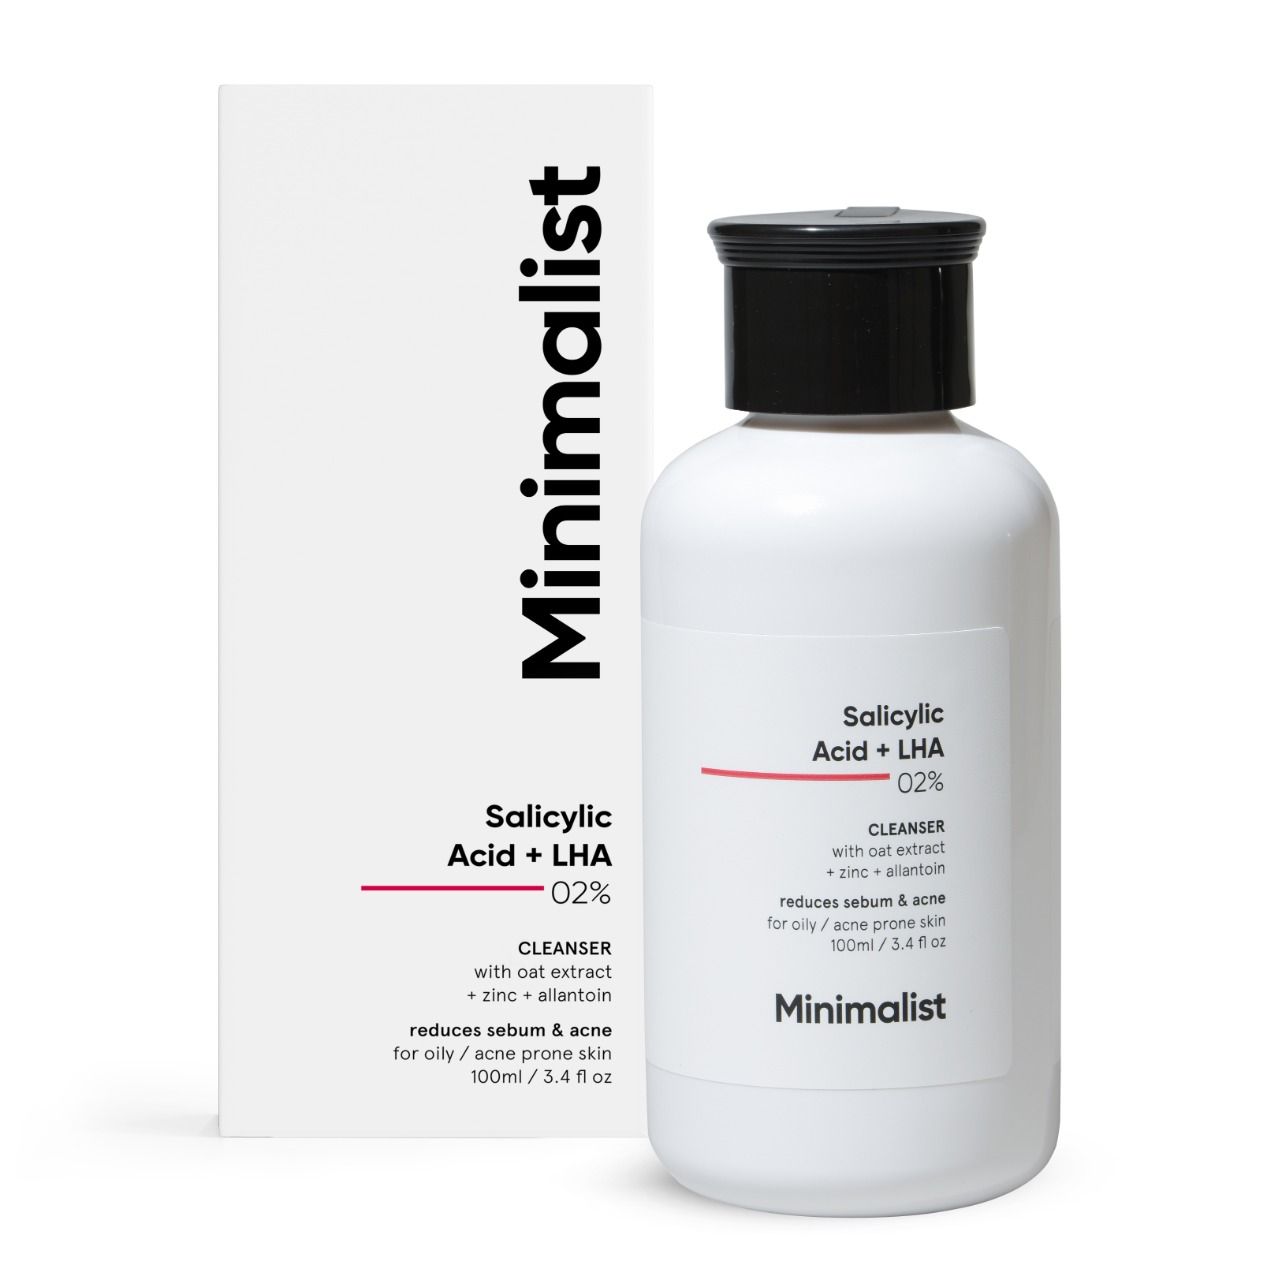 Minimalist 2% Salicylic Acid + LHA Face Cleanser With Zinc For Reducing Sebum & Acne